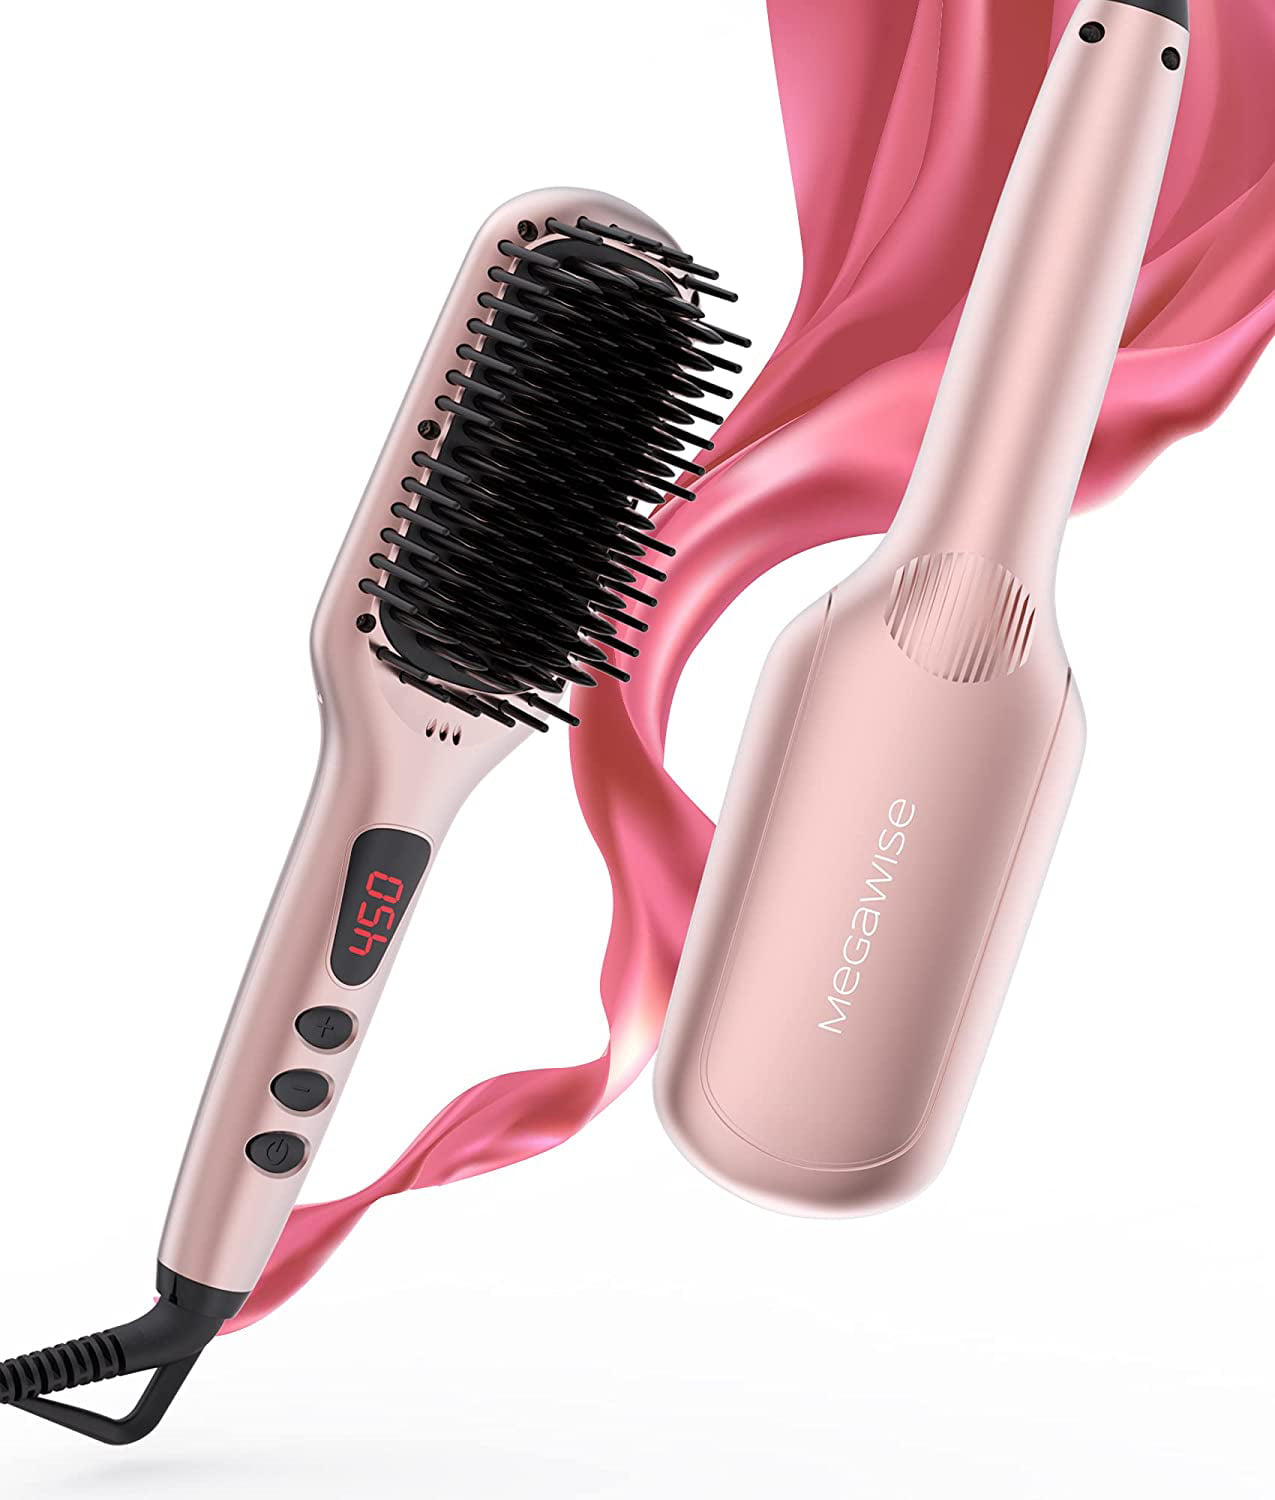 MEGAWISE Pro Ceramic Ionic Hair Straightener Brush for Home Salon | MCH  Fast 20s Heating Tech with Auto-Off Safety | Anti-Scald with Universal Dual  Voltage | Rotatable Power Cord 